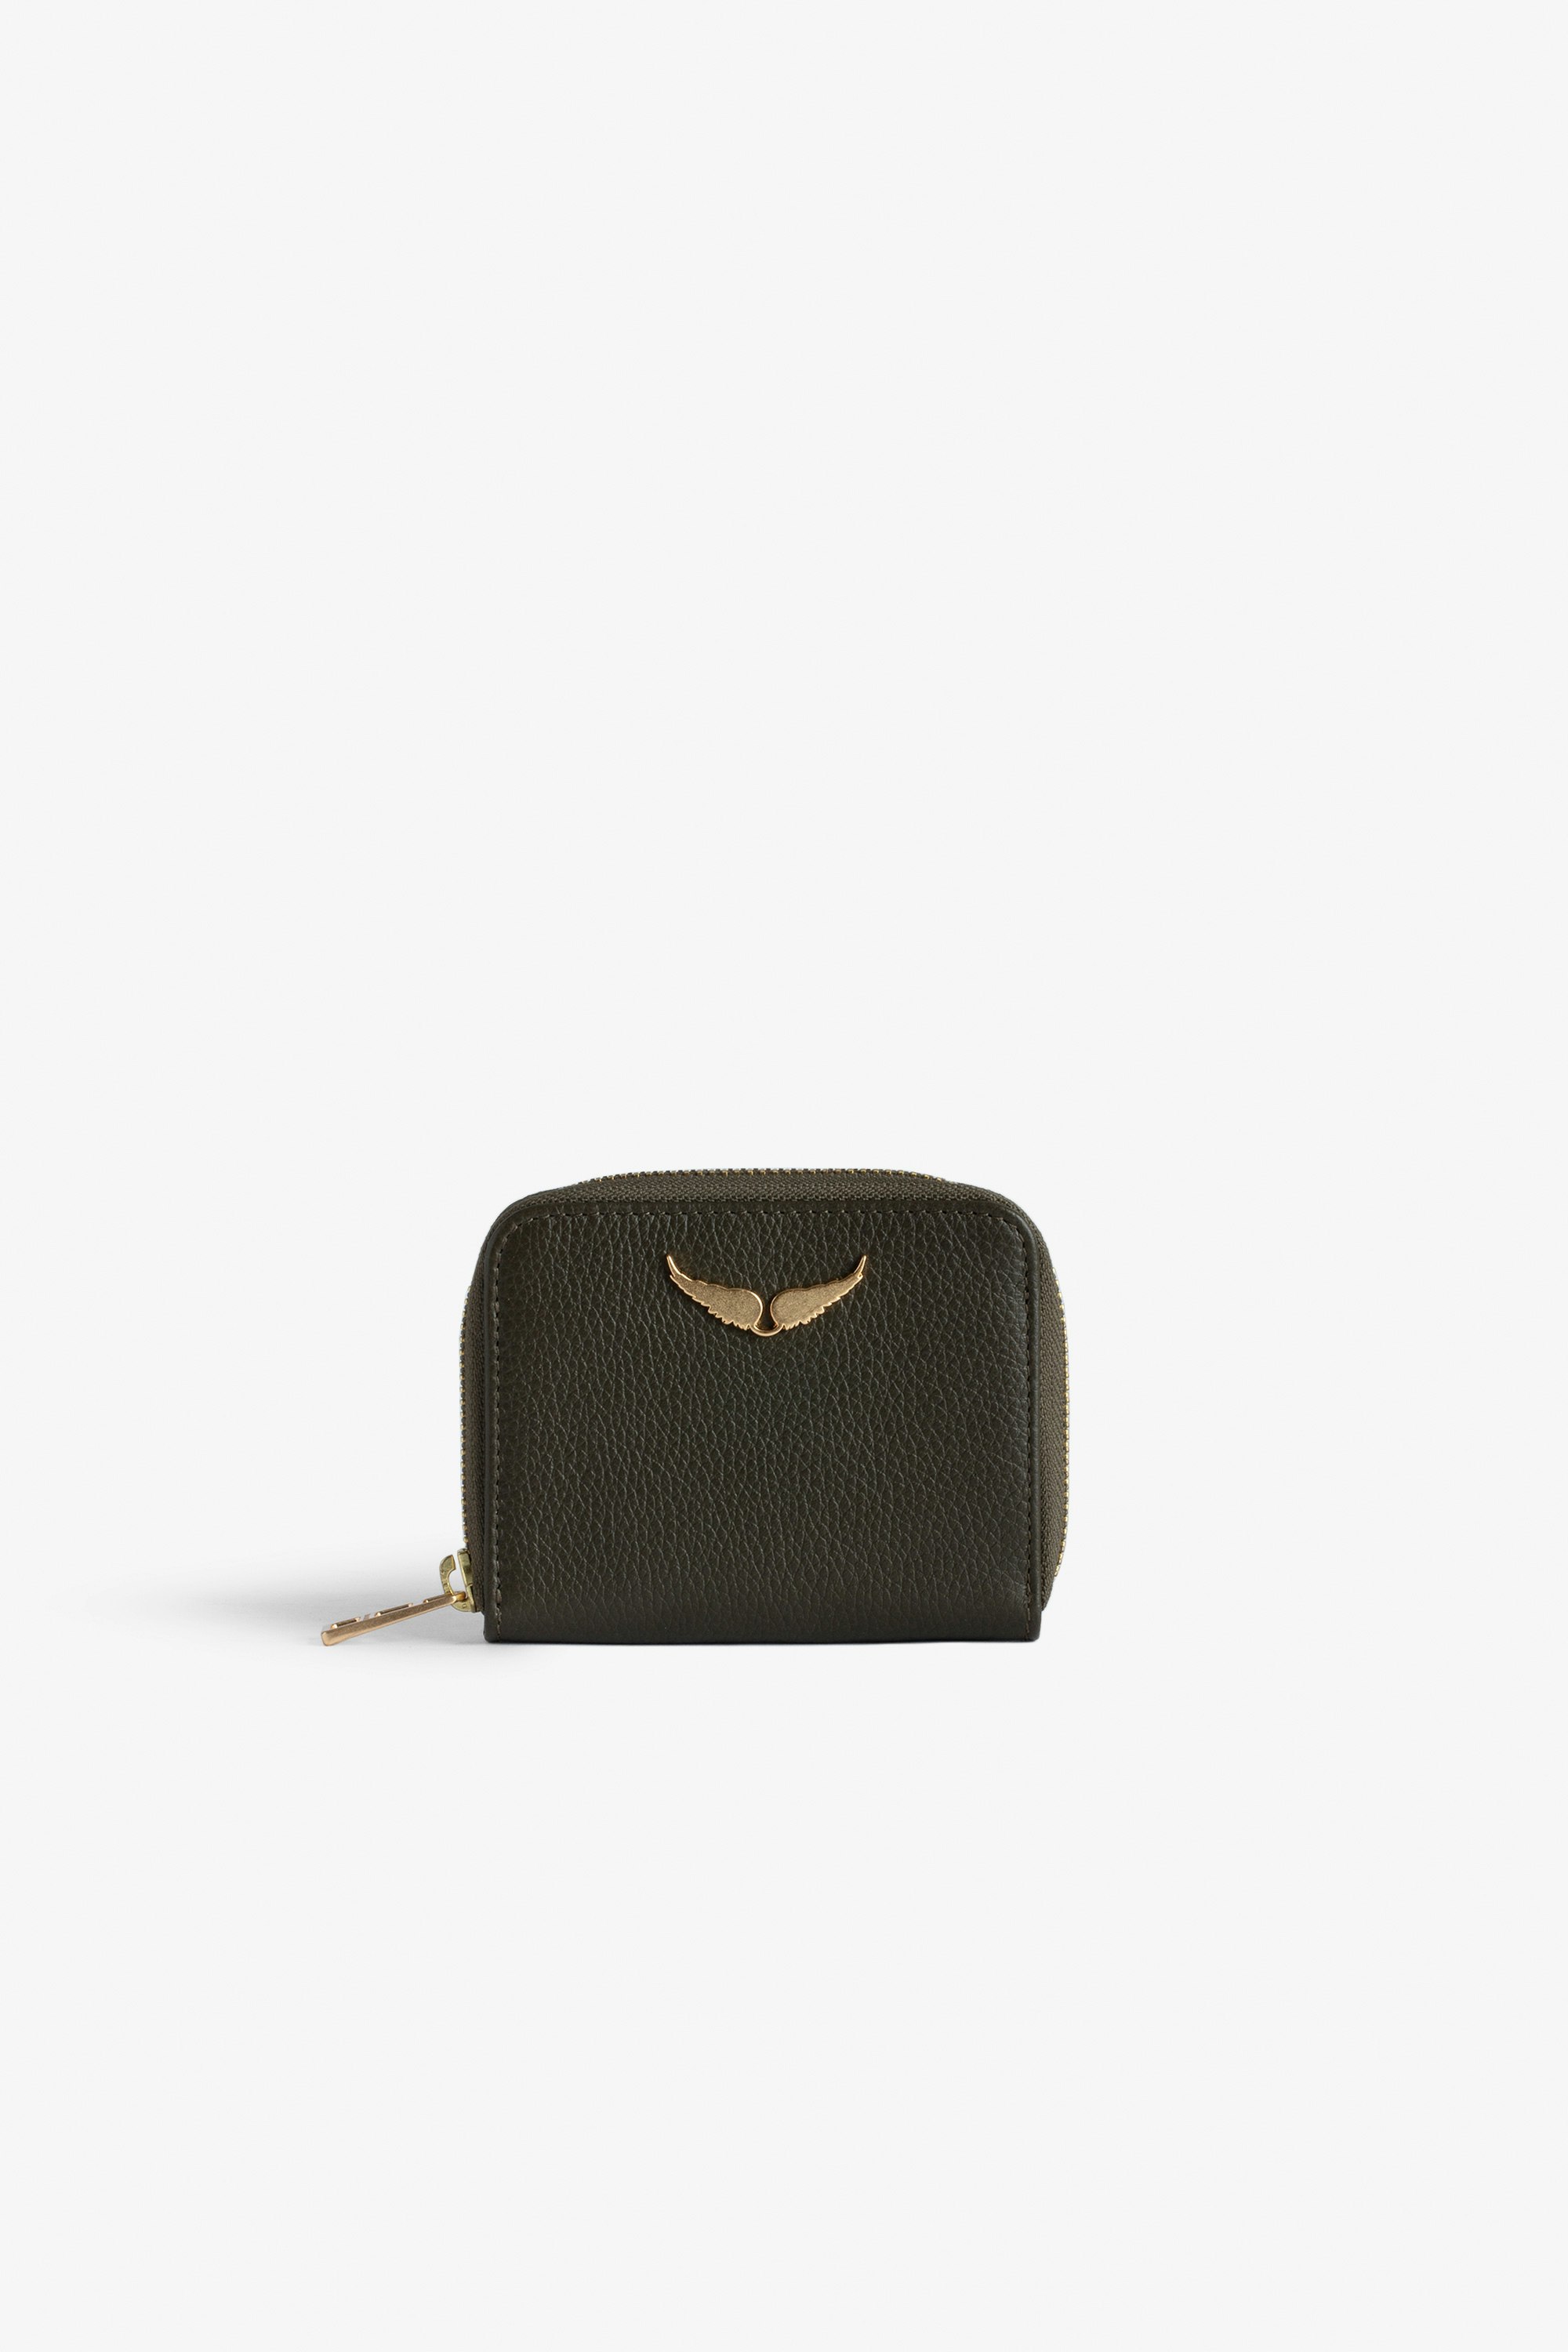 Mini ZV Coin 財布 Women’s khaki grained leather card holder with gold-tone wings charm.